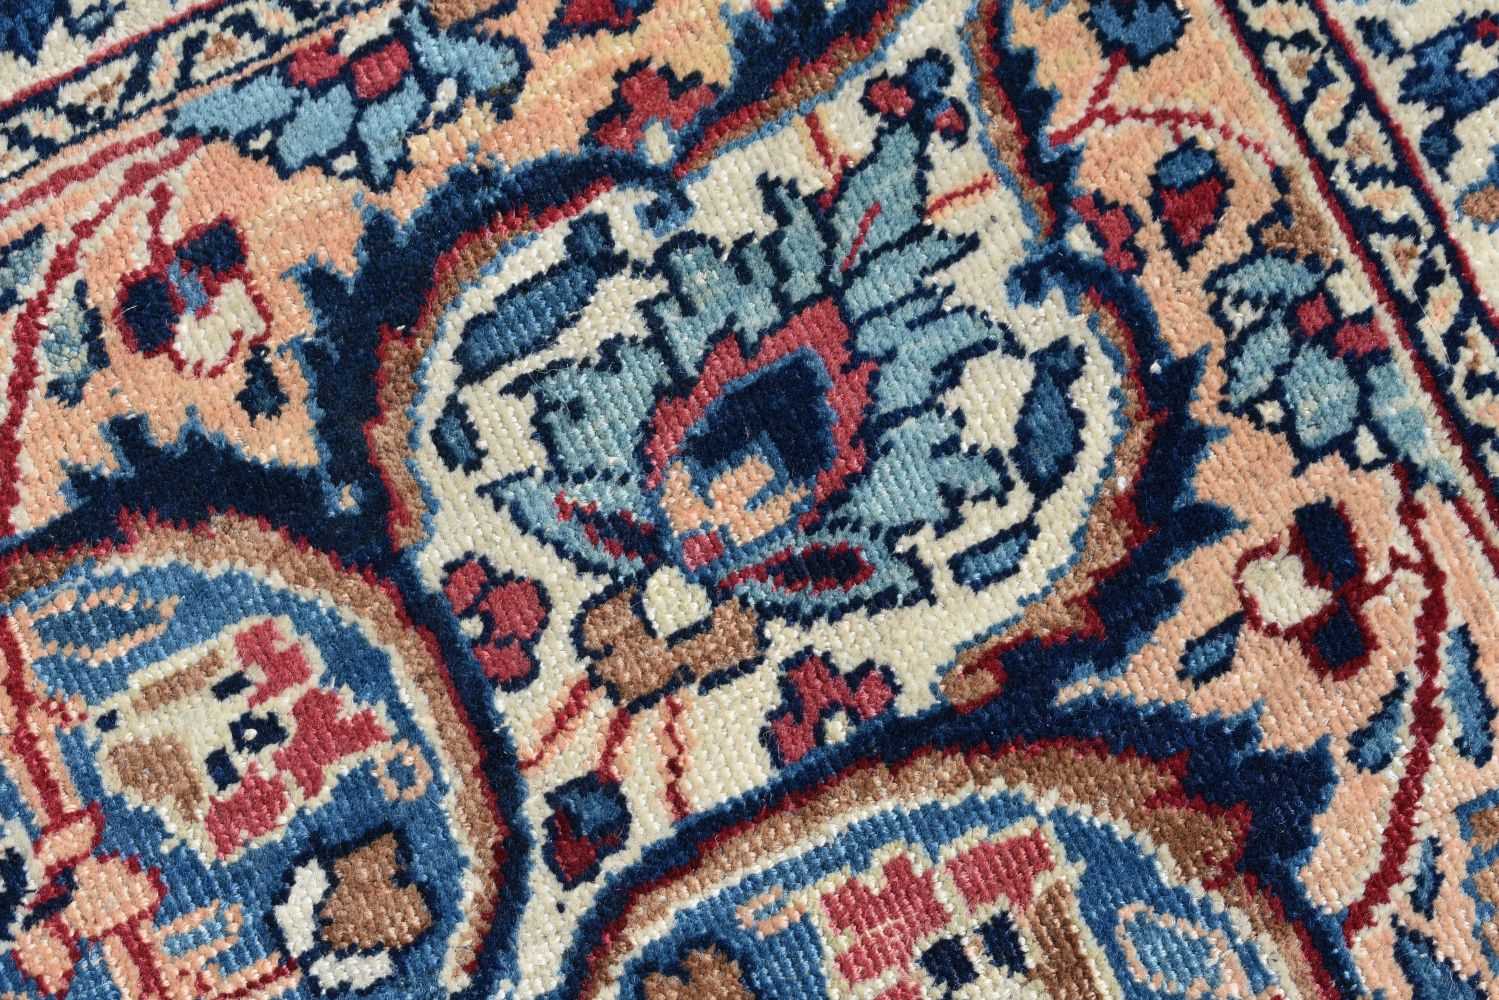 A Persian rug 189 x 122 cm - Image 8 of 14